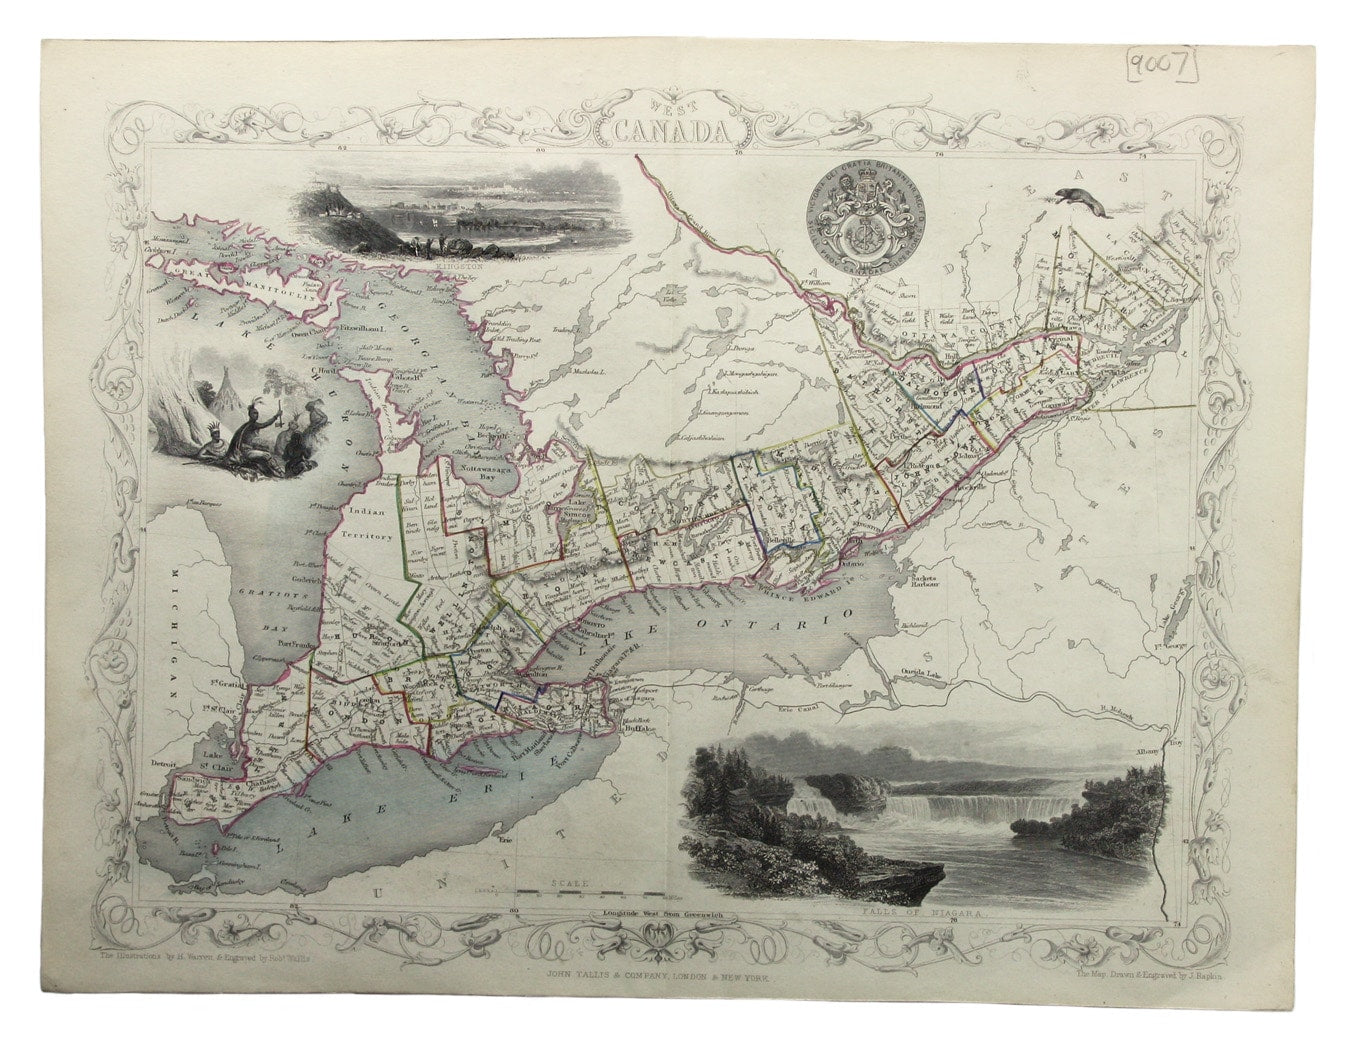 Tallis' Map of West Canada